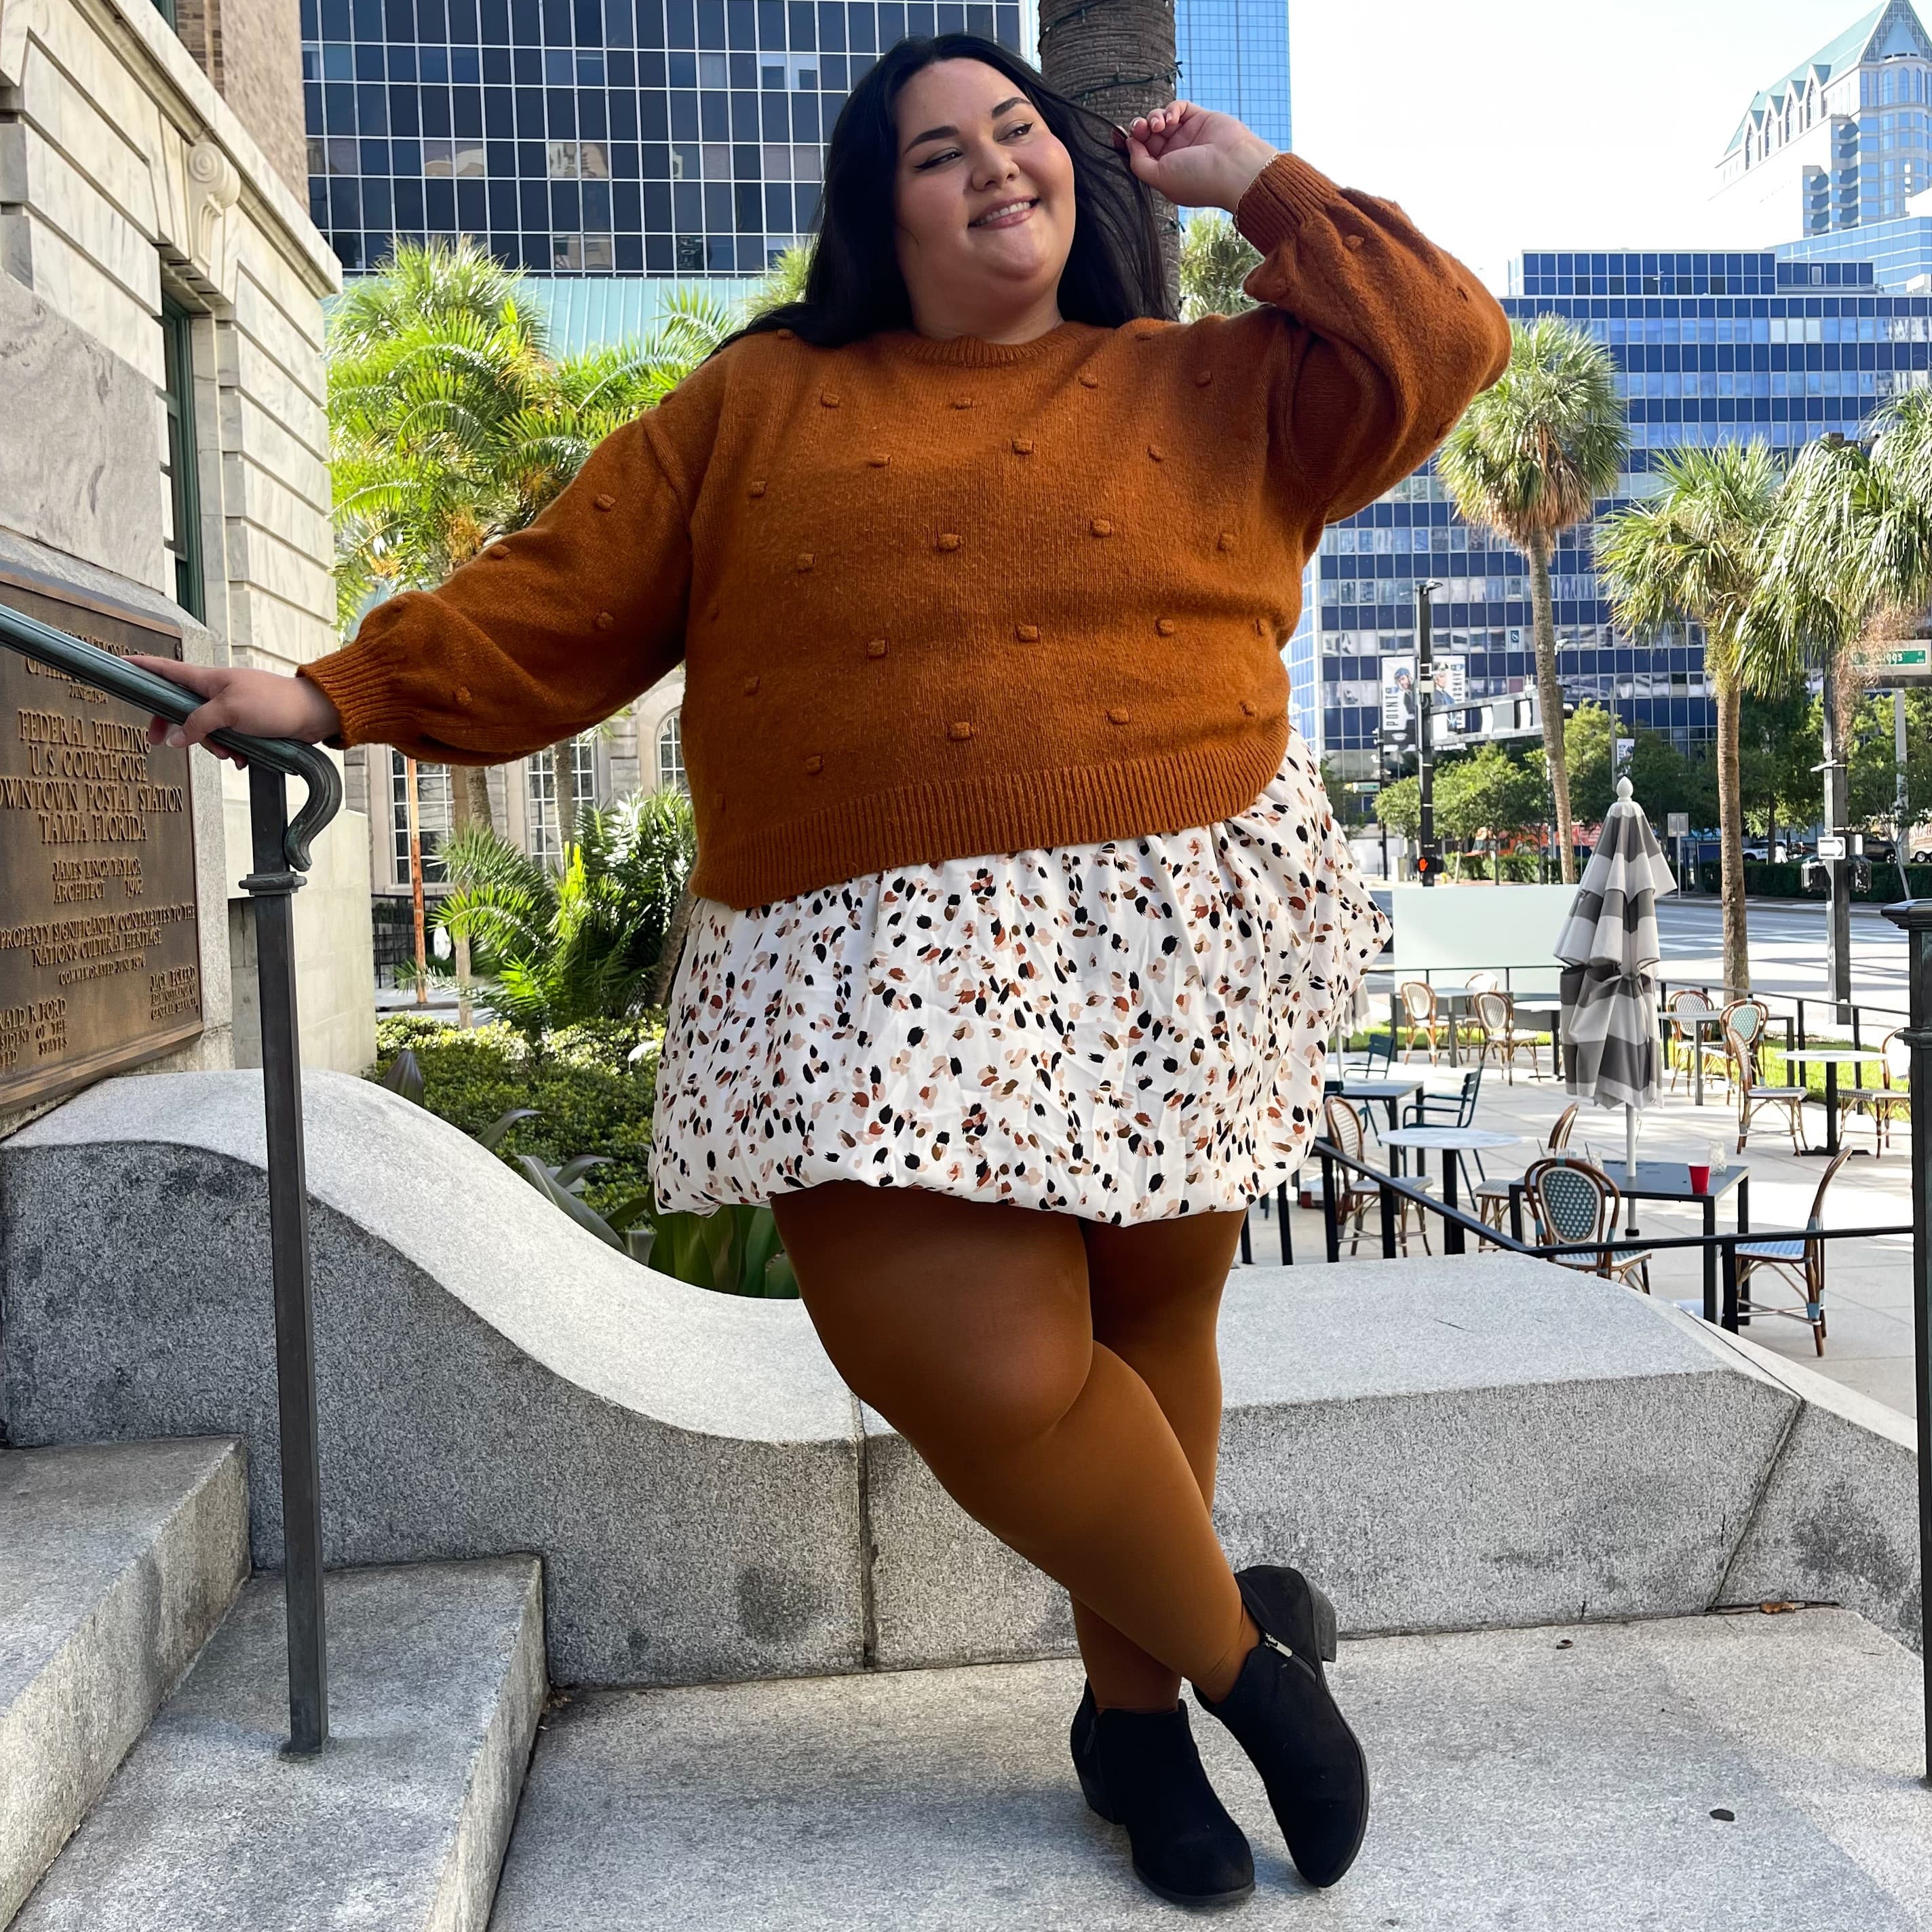 If I was rich I would buy SO MANY SnagTights : r/PlusSizeFashion